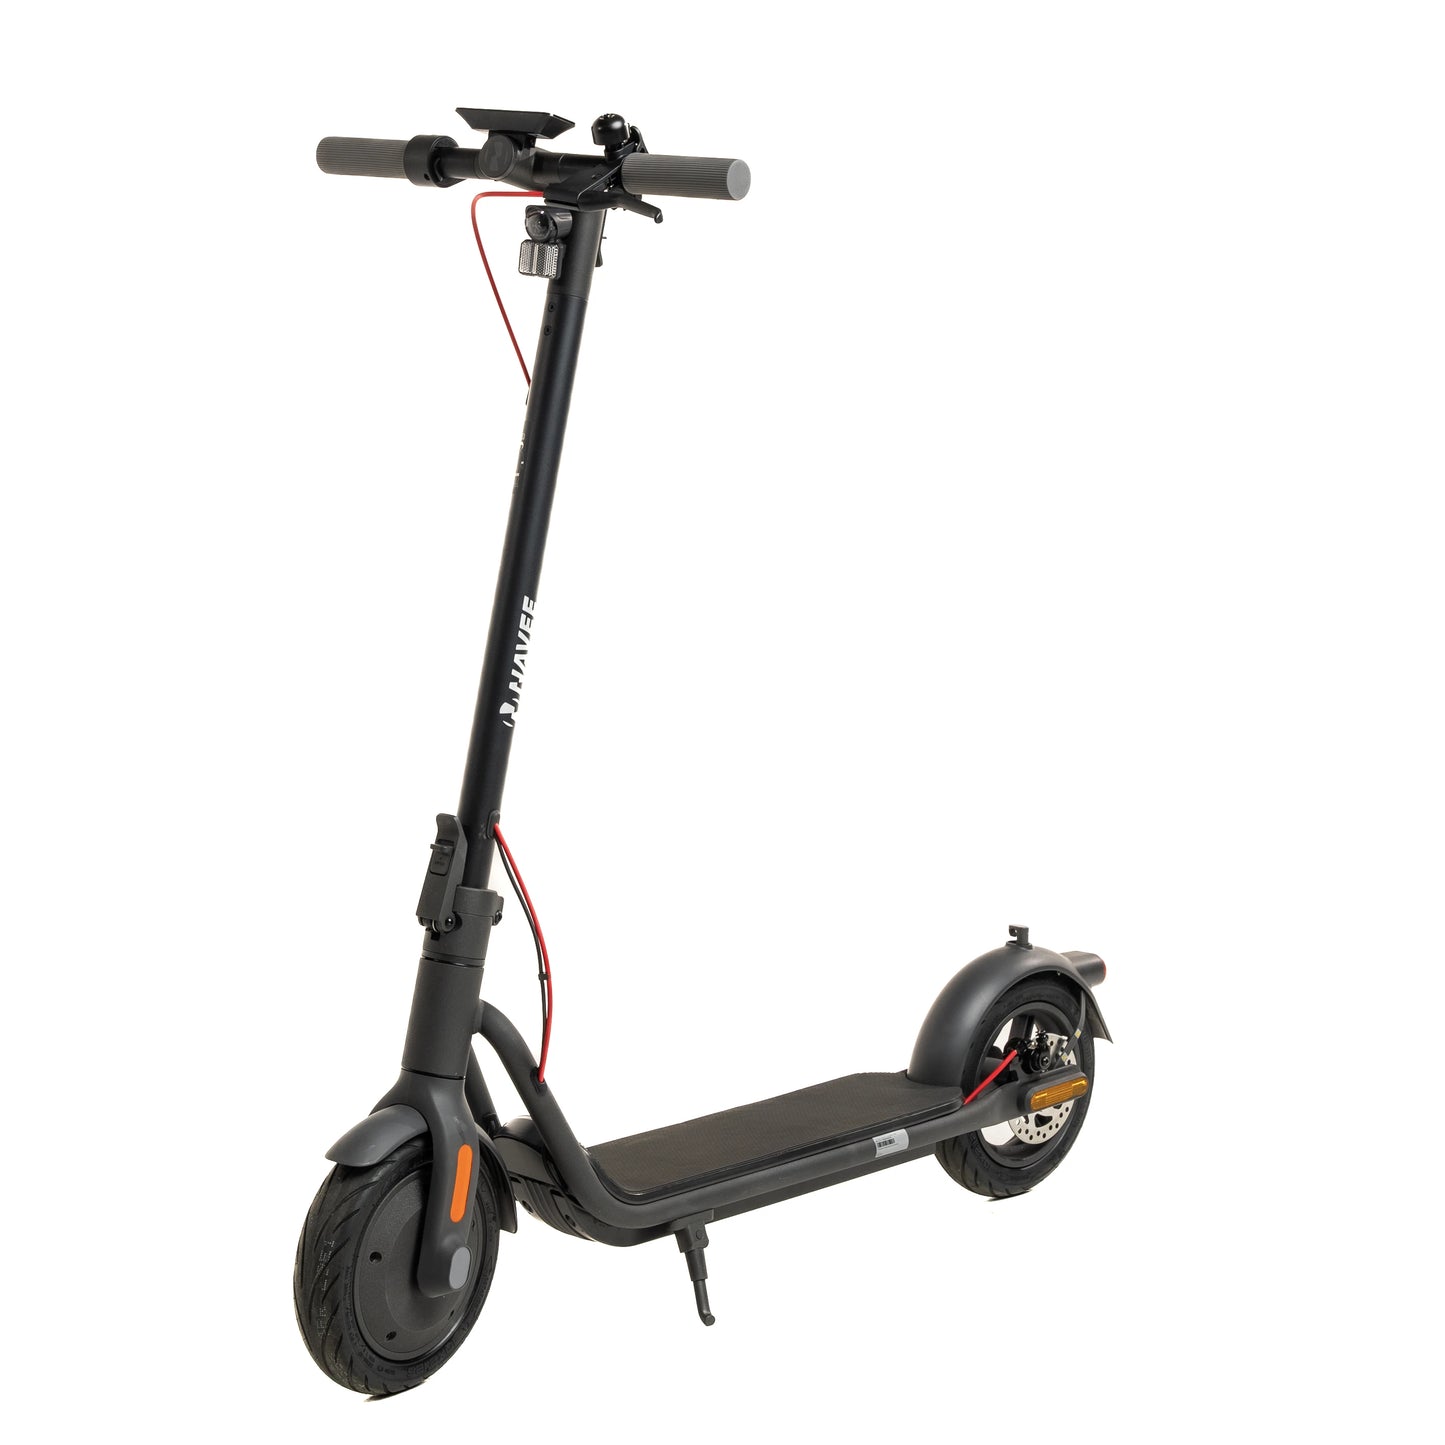 Navee V50 review: scooter with handlebar that rotates - GizChina.it